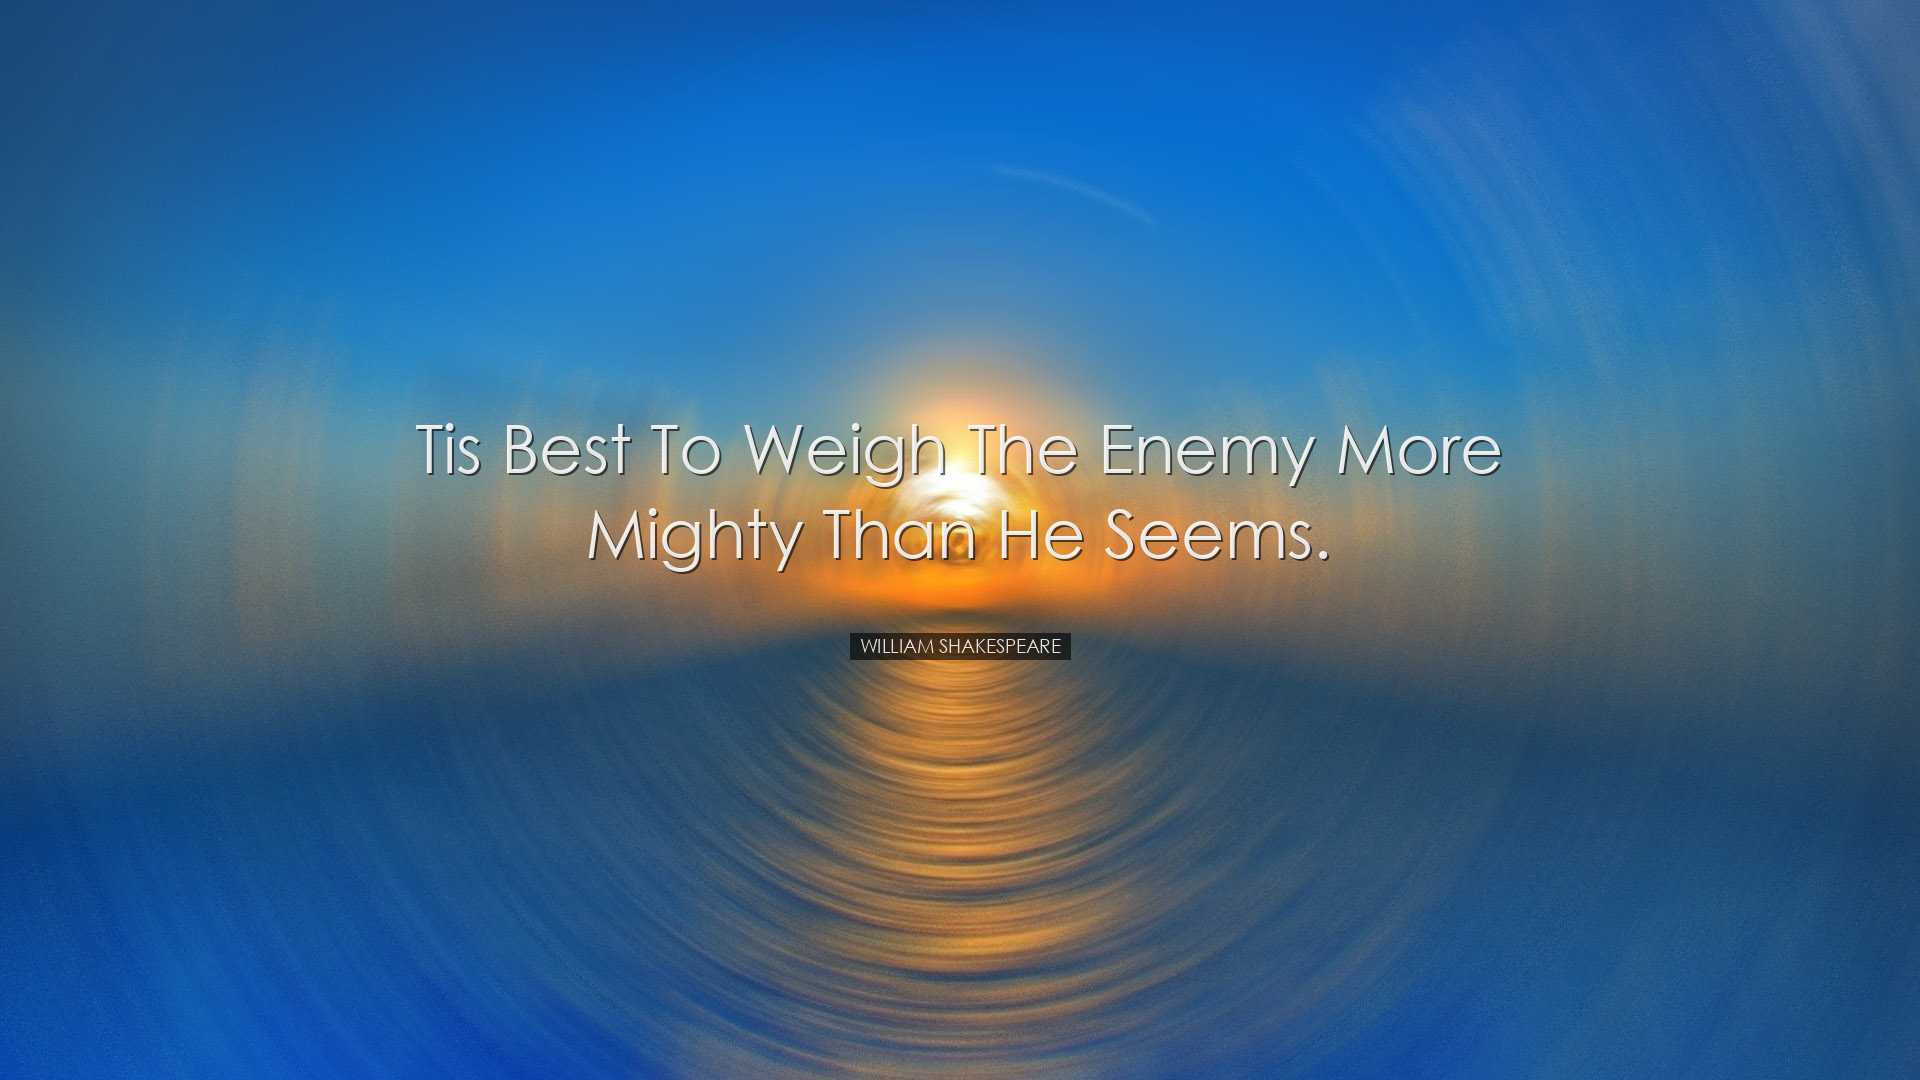 Tis best to weigh the enemy more mighty than he seems. - William S